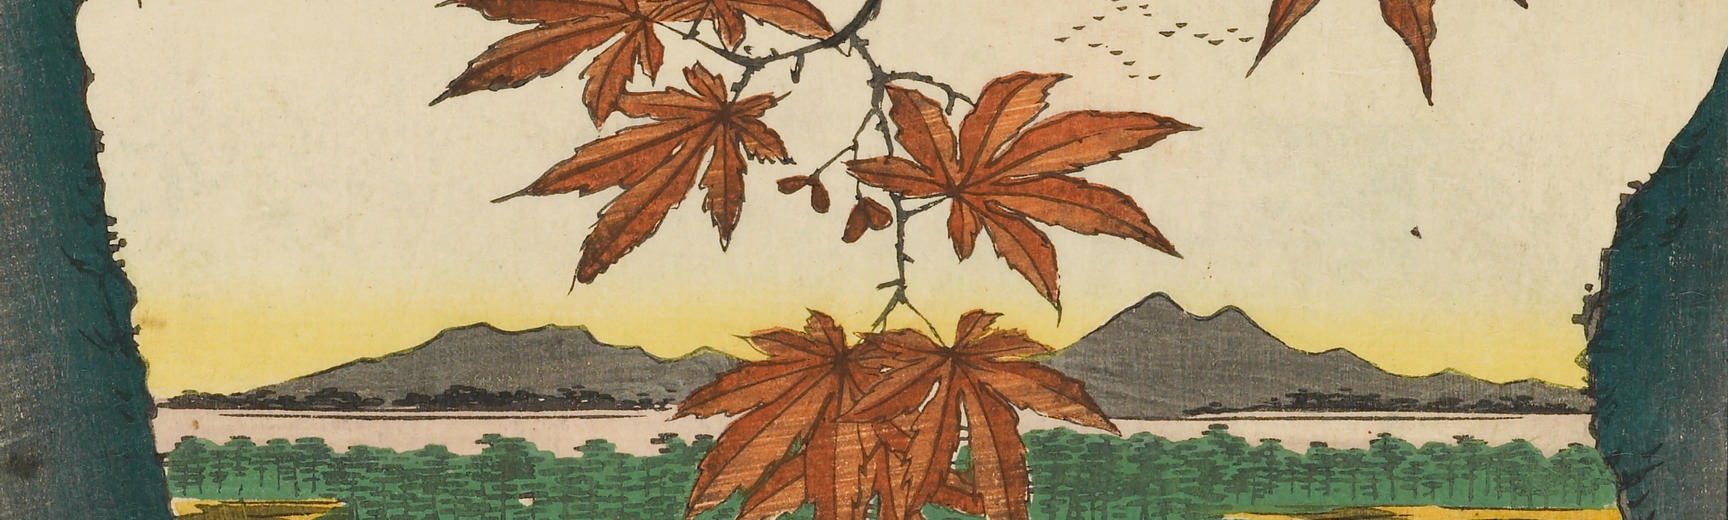 Detail from a Japanese woodblock print by Hiroshige, with maple leaves in the foreground and mount fuji and a village behind